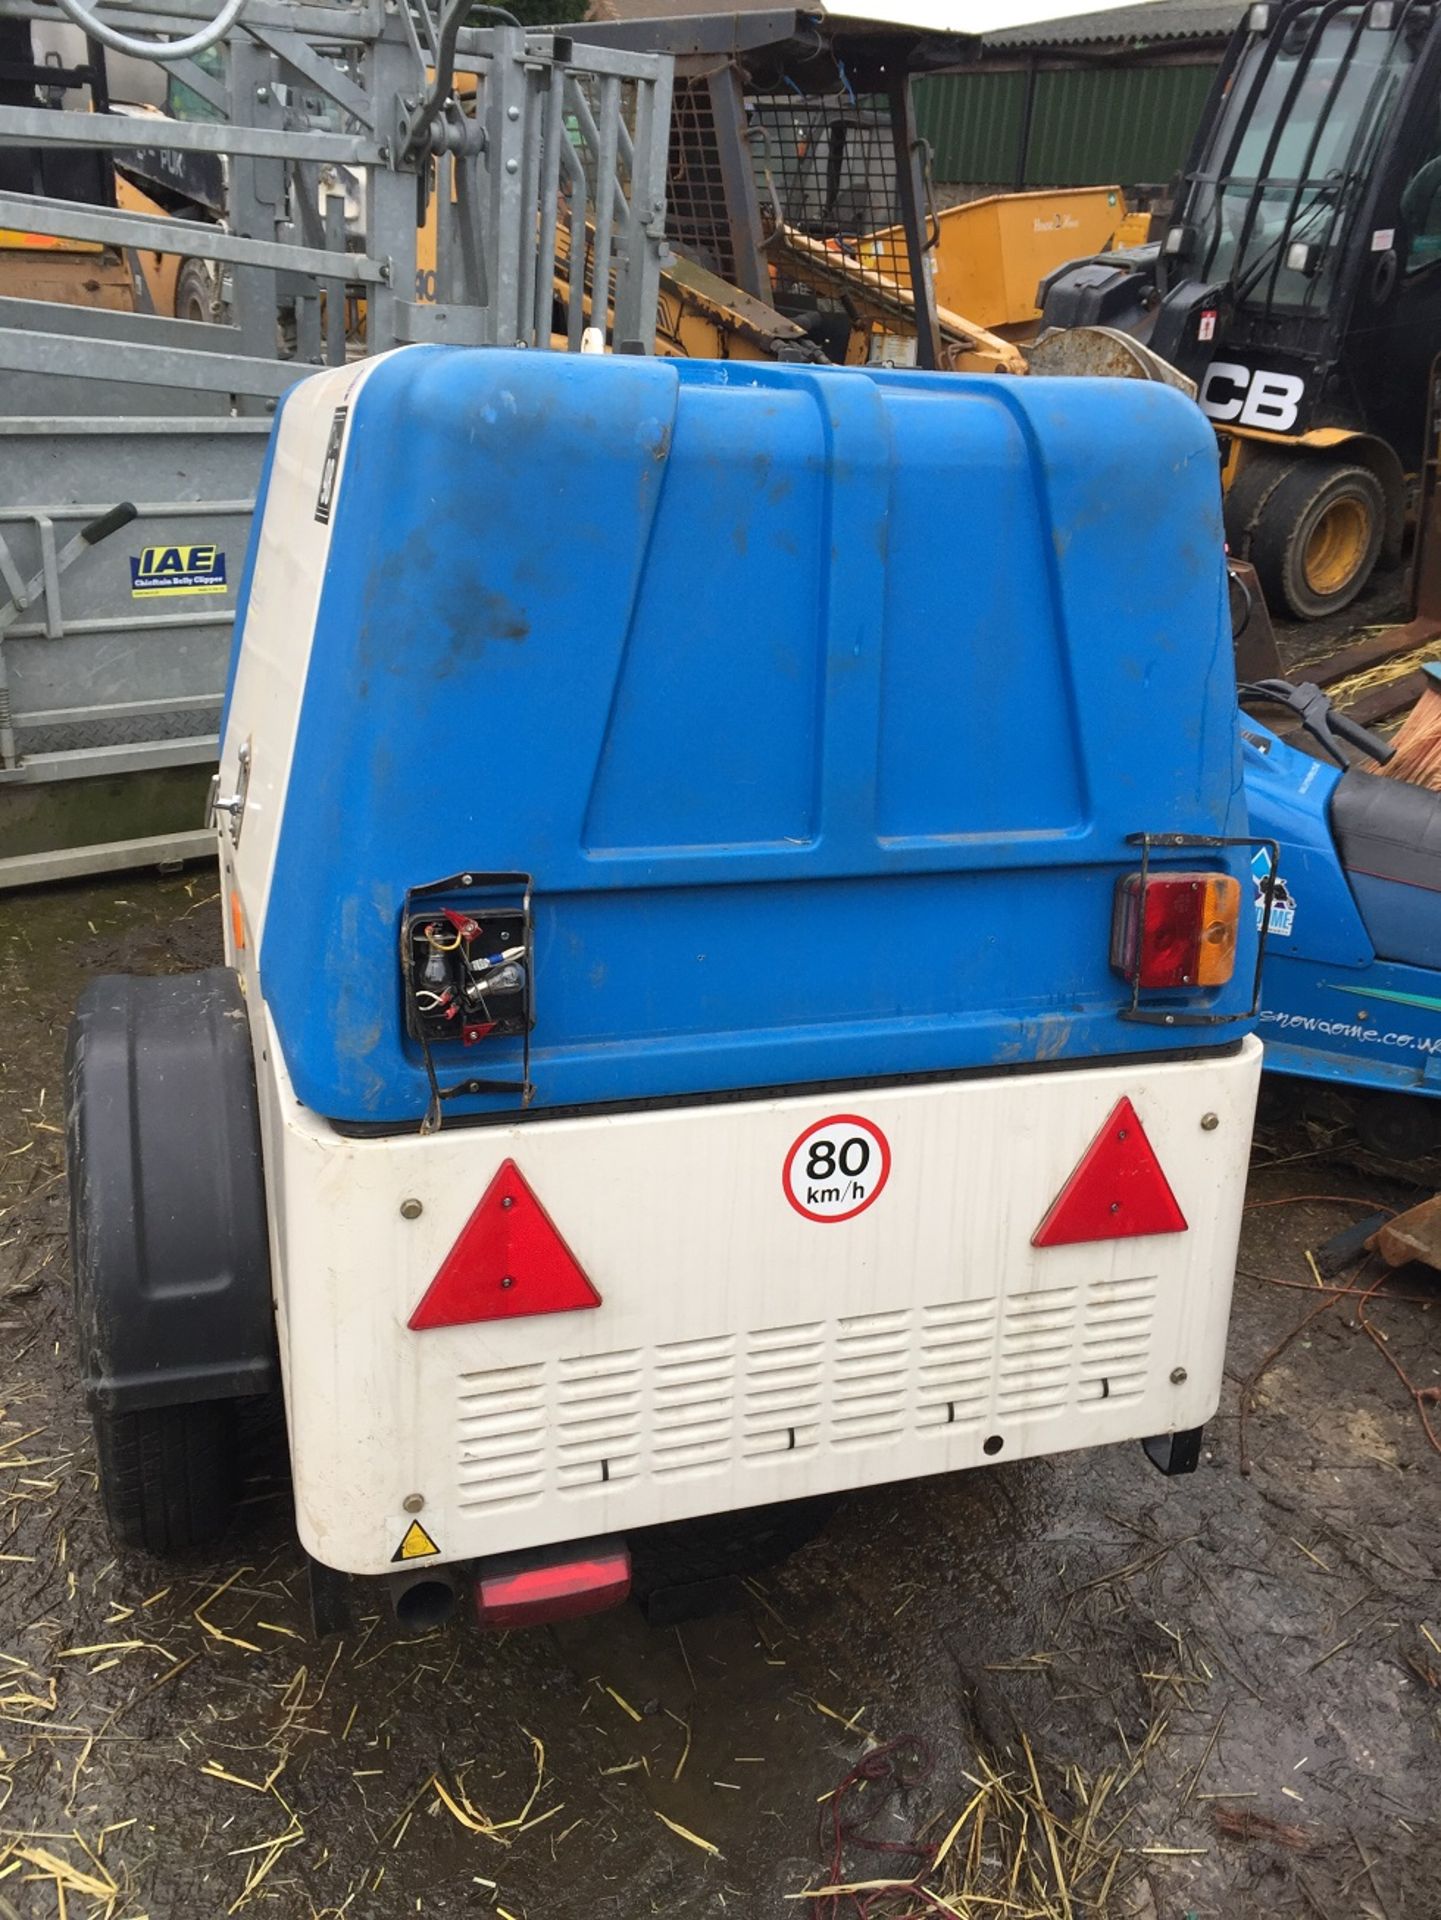 DS - FG WILSON LH30 GENERATOR 30 KVA 3 PHASE 240V ONLY DONE 26 HOURS   30 KVA  3 PHASE   LISTER- - Image 2 of 10